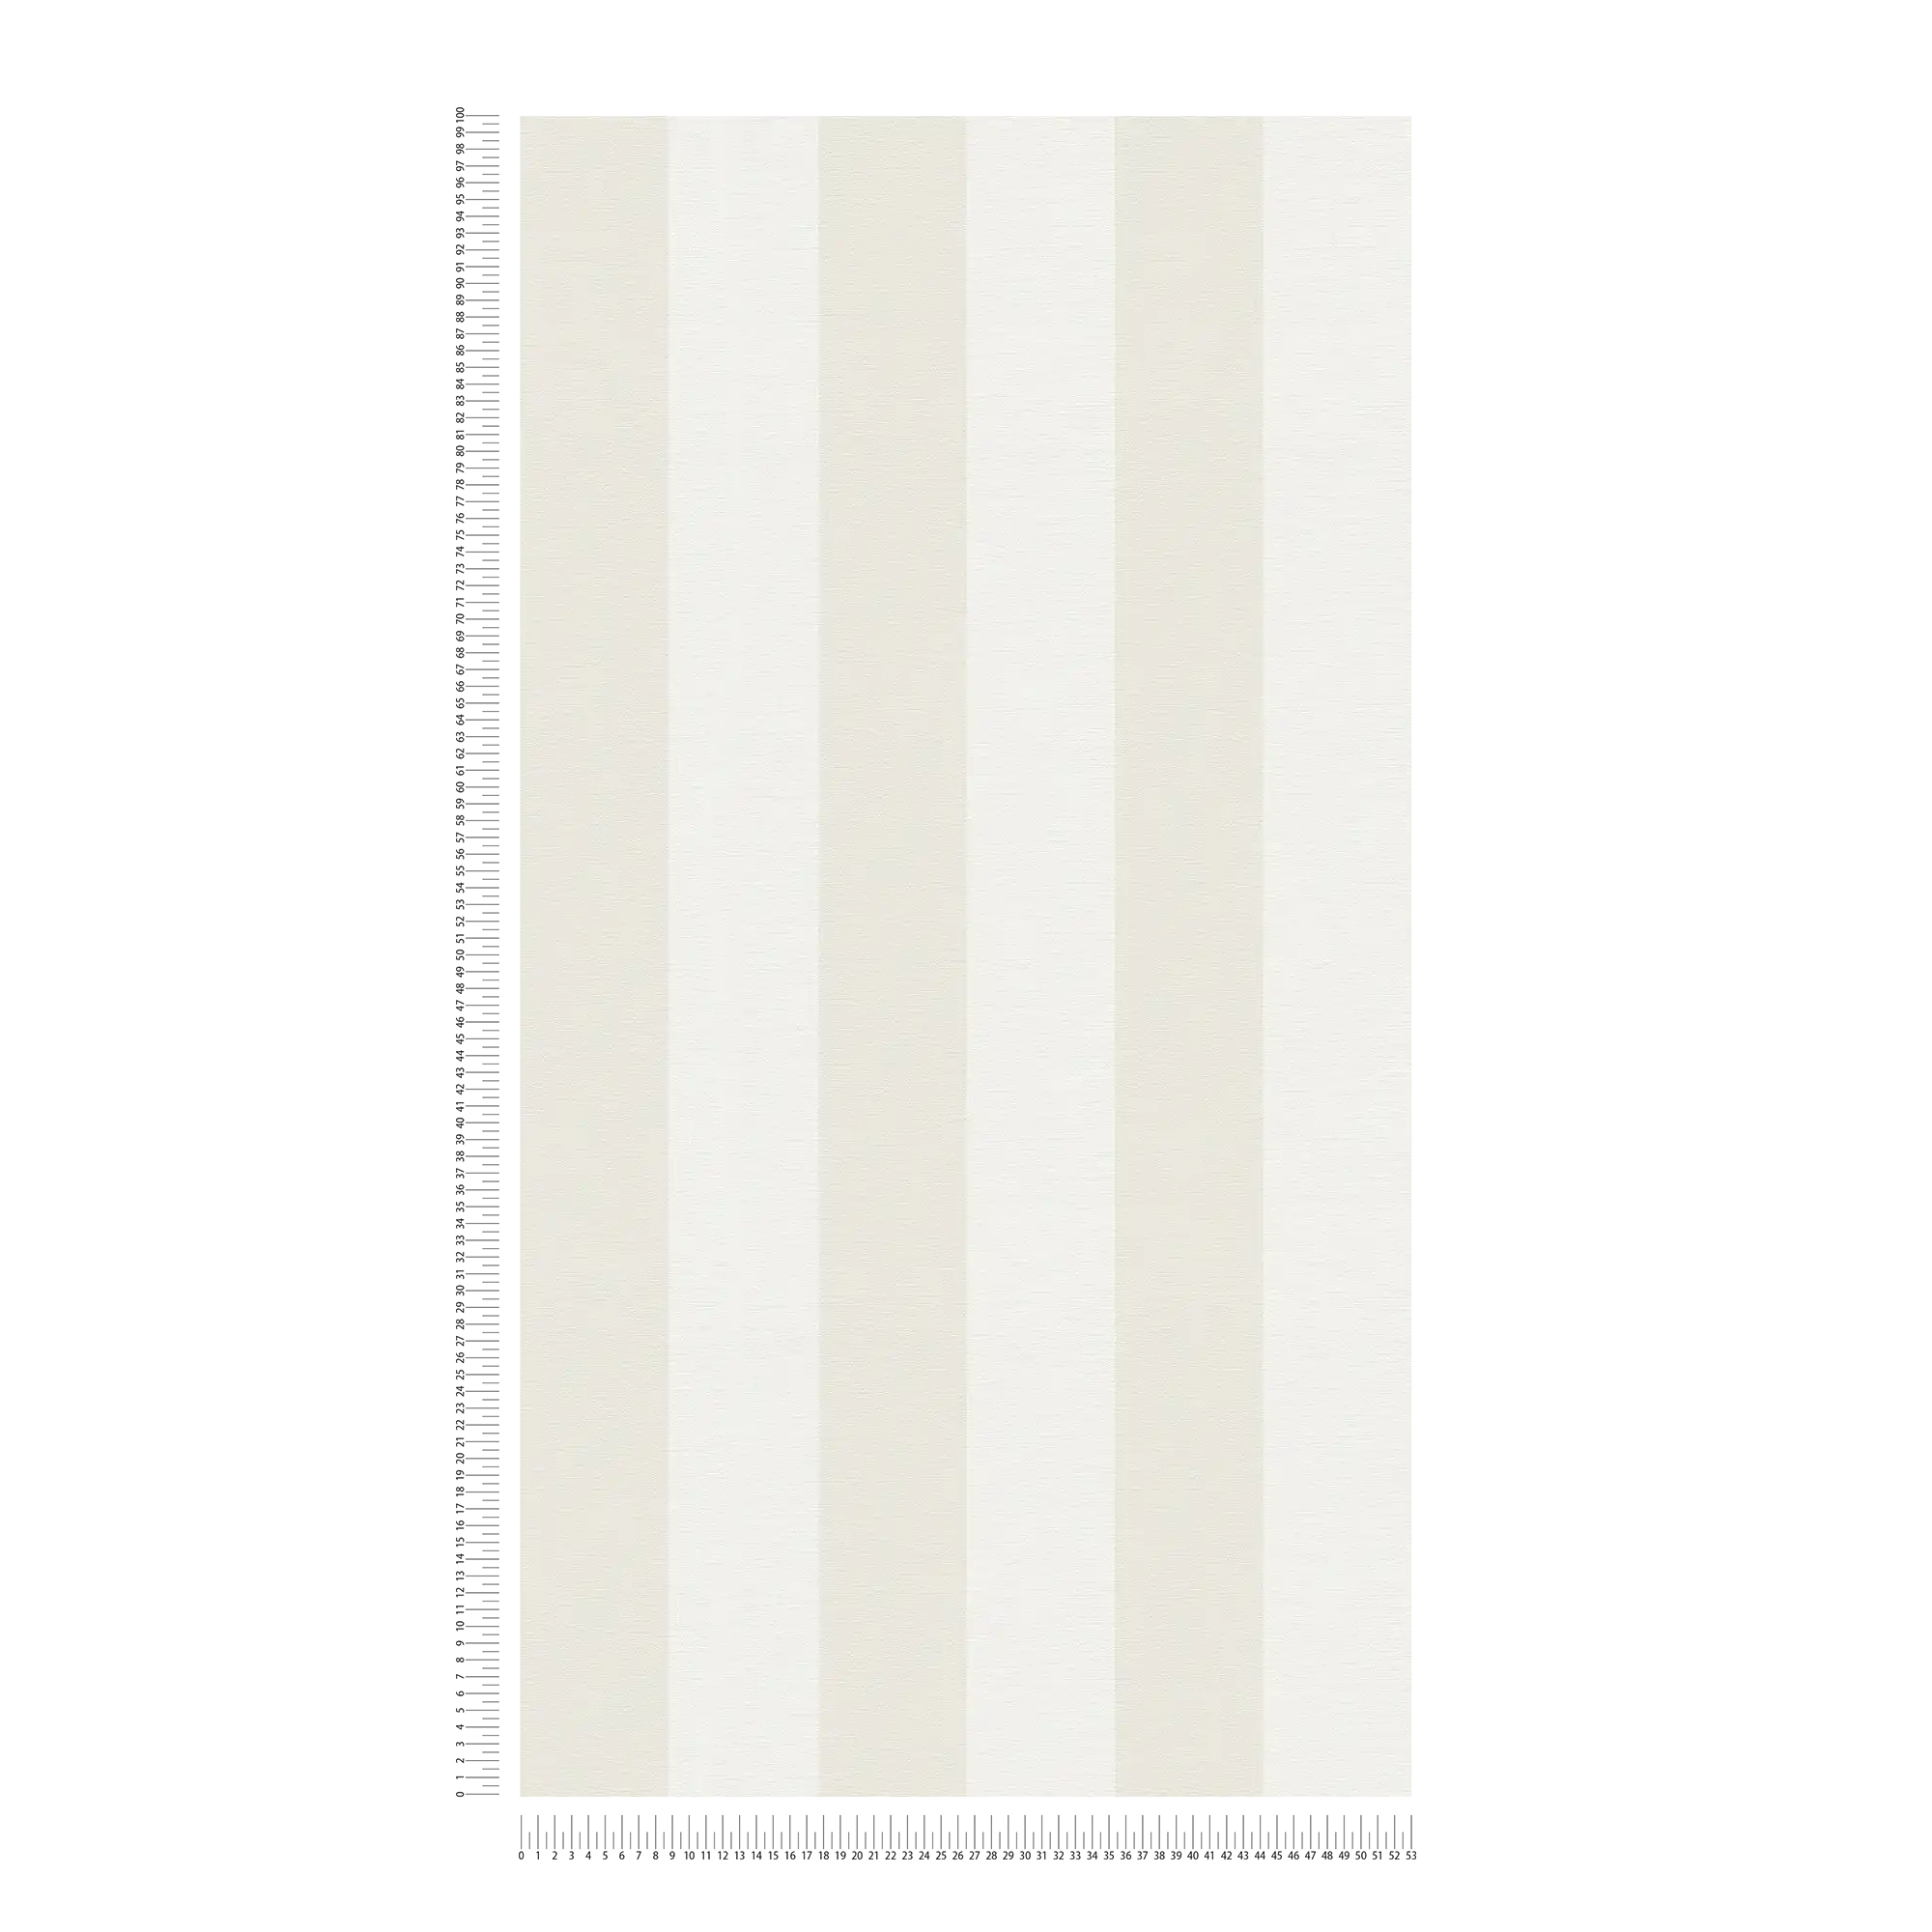             Block stripes wallpaper with textile look for young design - beige, white
        